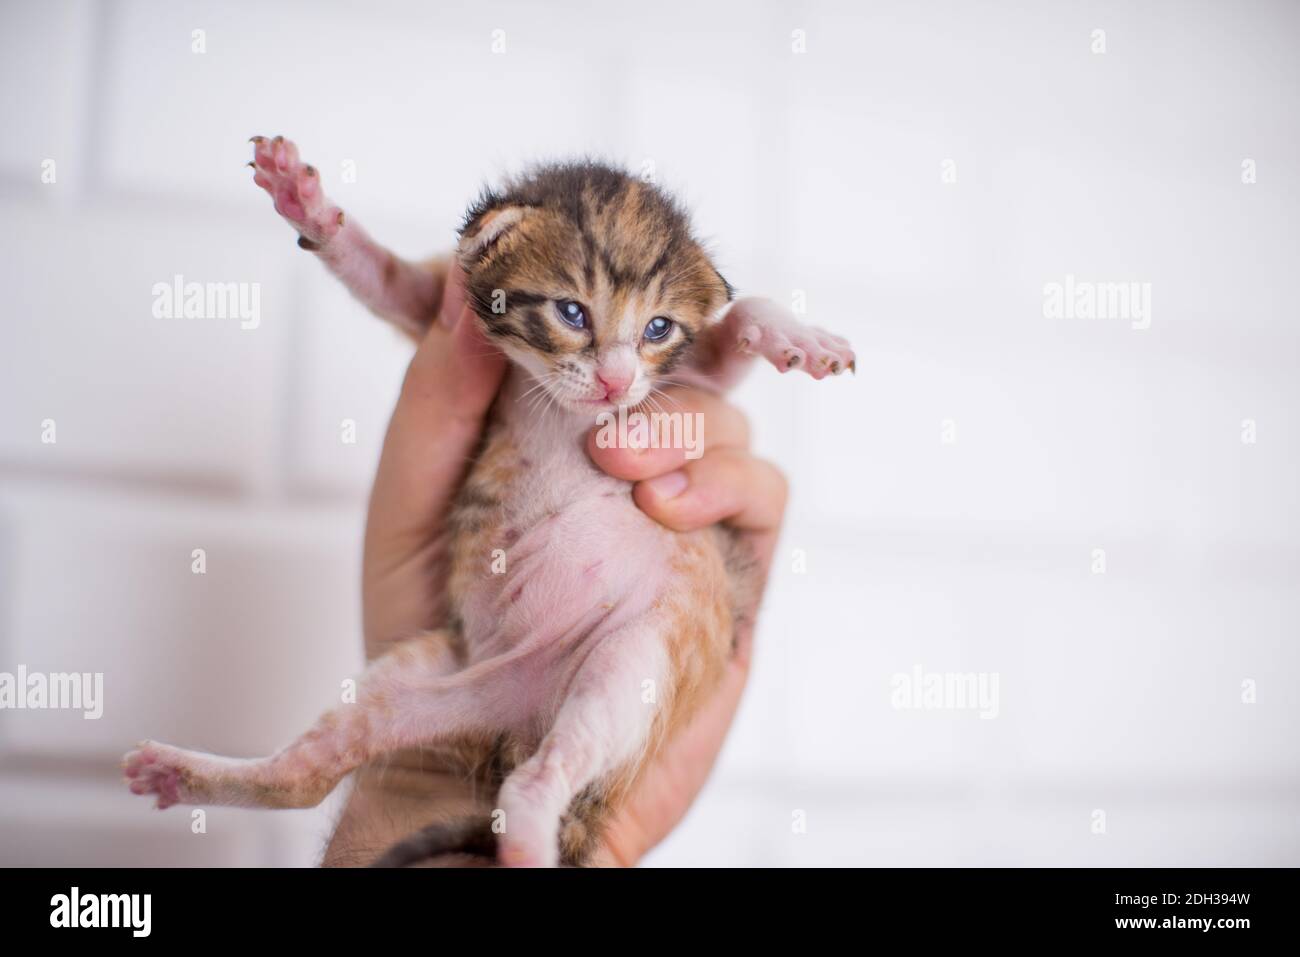 2 weeks old baby kitten in hand on an isolated white background Stock Photo